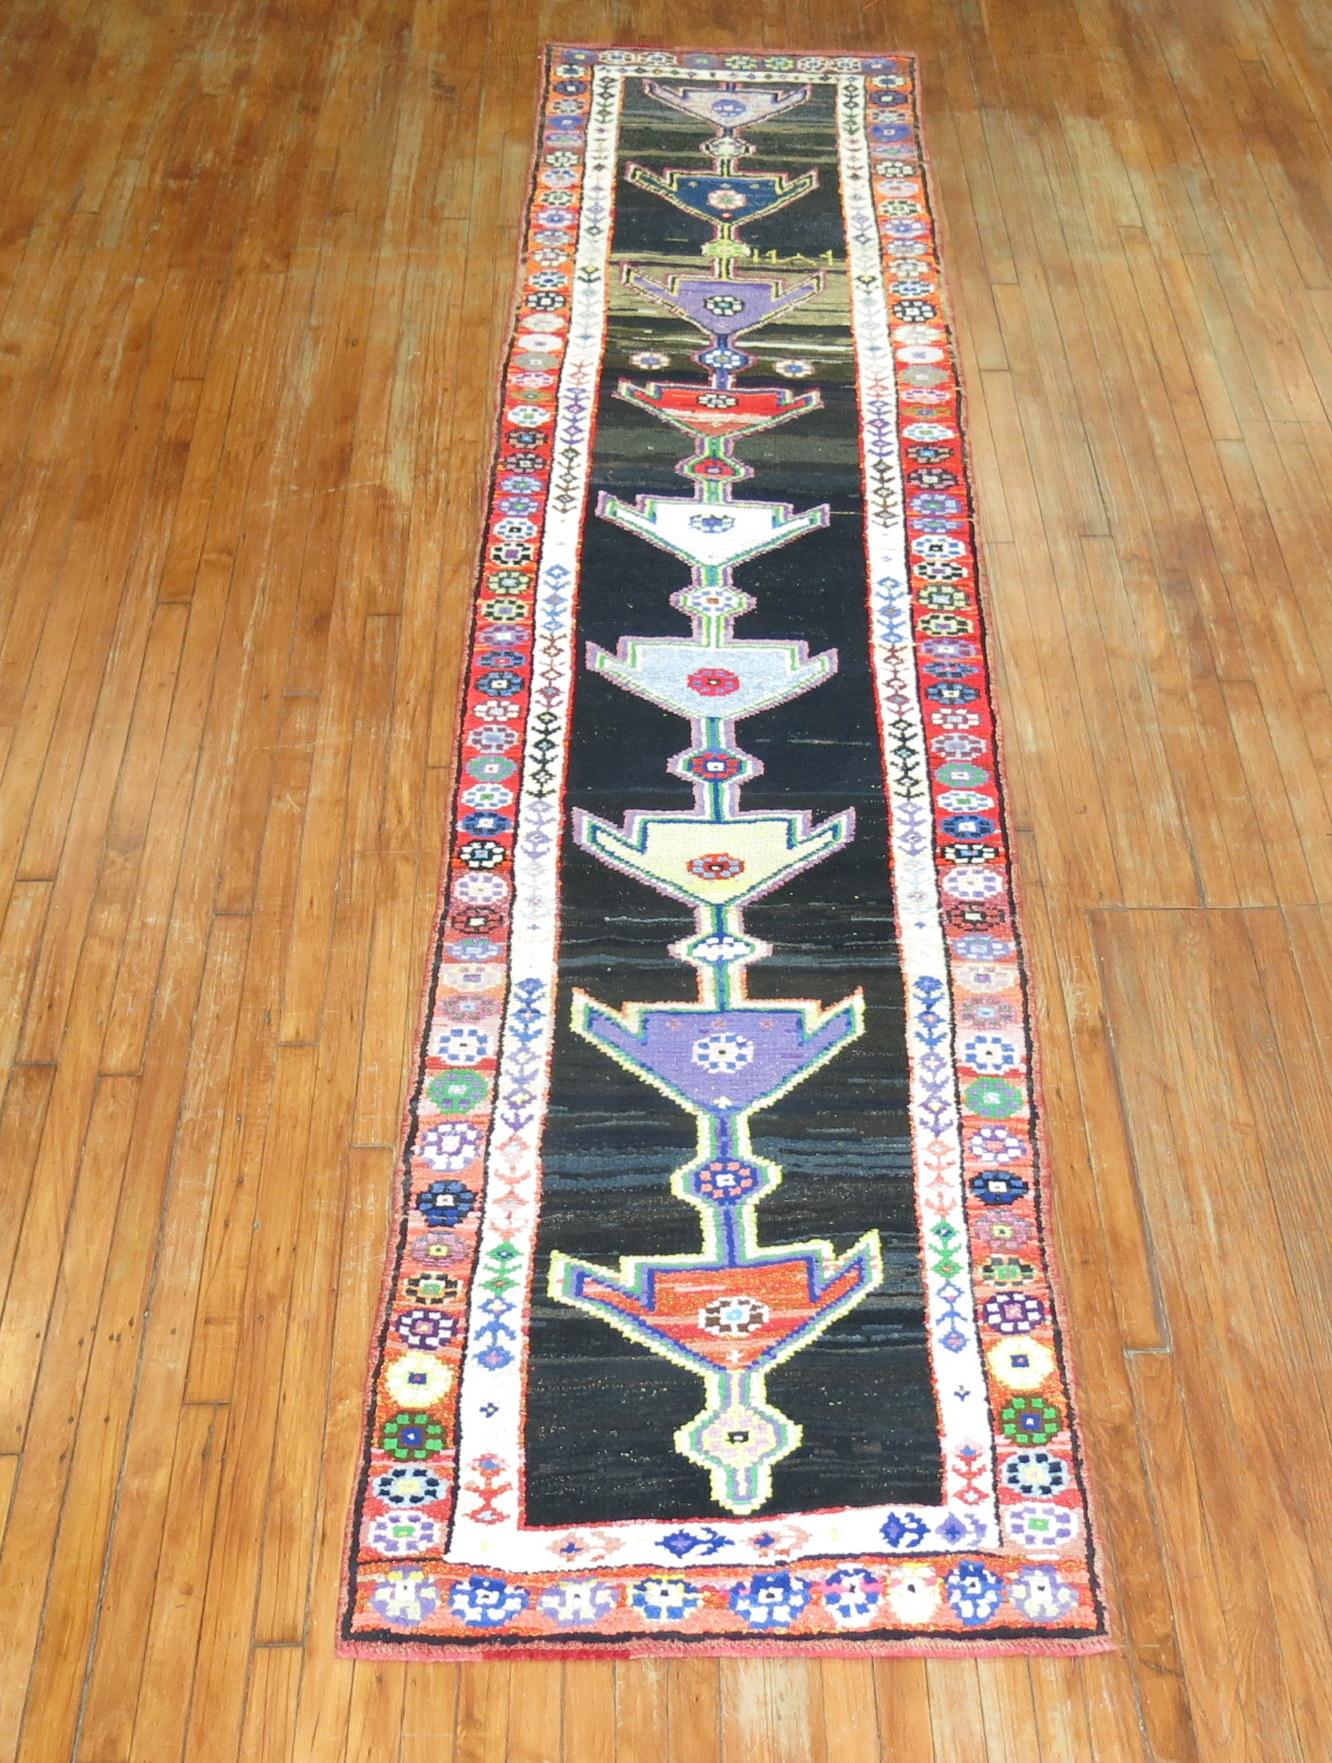 A fun Turkish Anatolian runner with a flashy array of electric colors on a striated charcoal brown and gray color ground. Bright red, orange, purple and neon green accents featured, mid-20th century.

Measures: 2'10